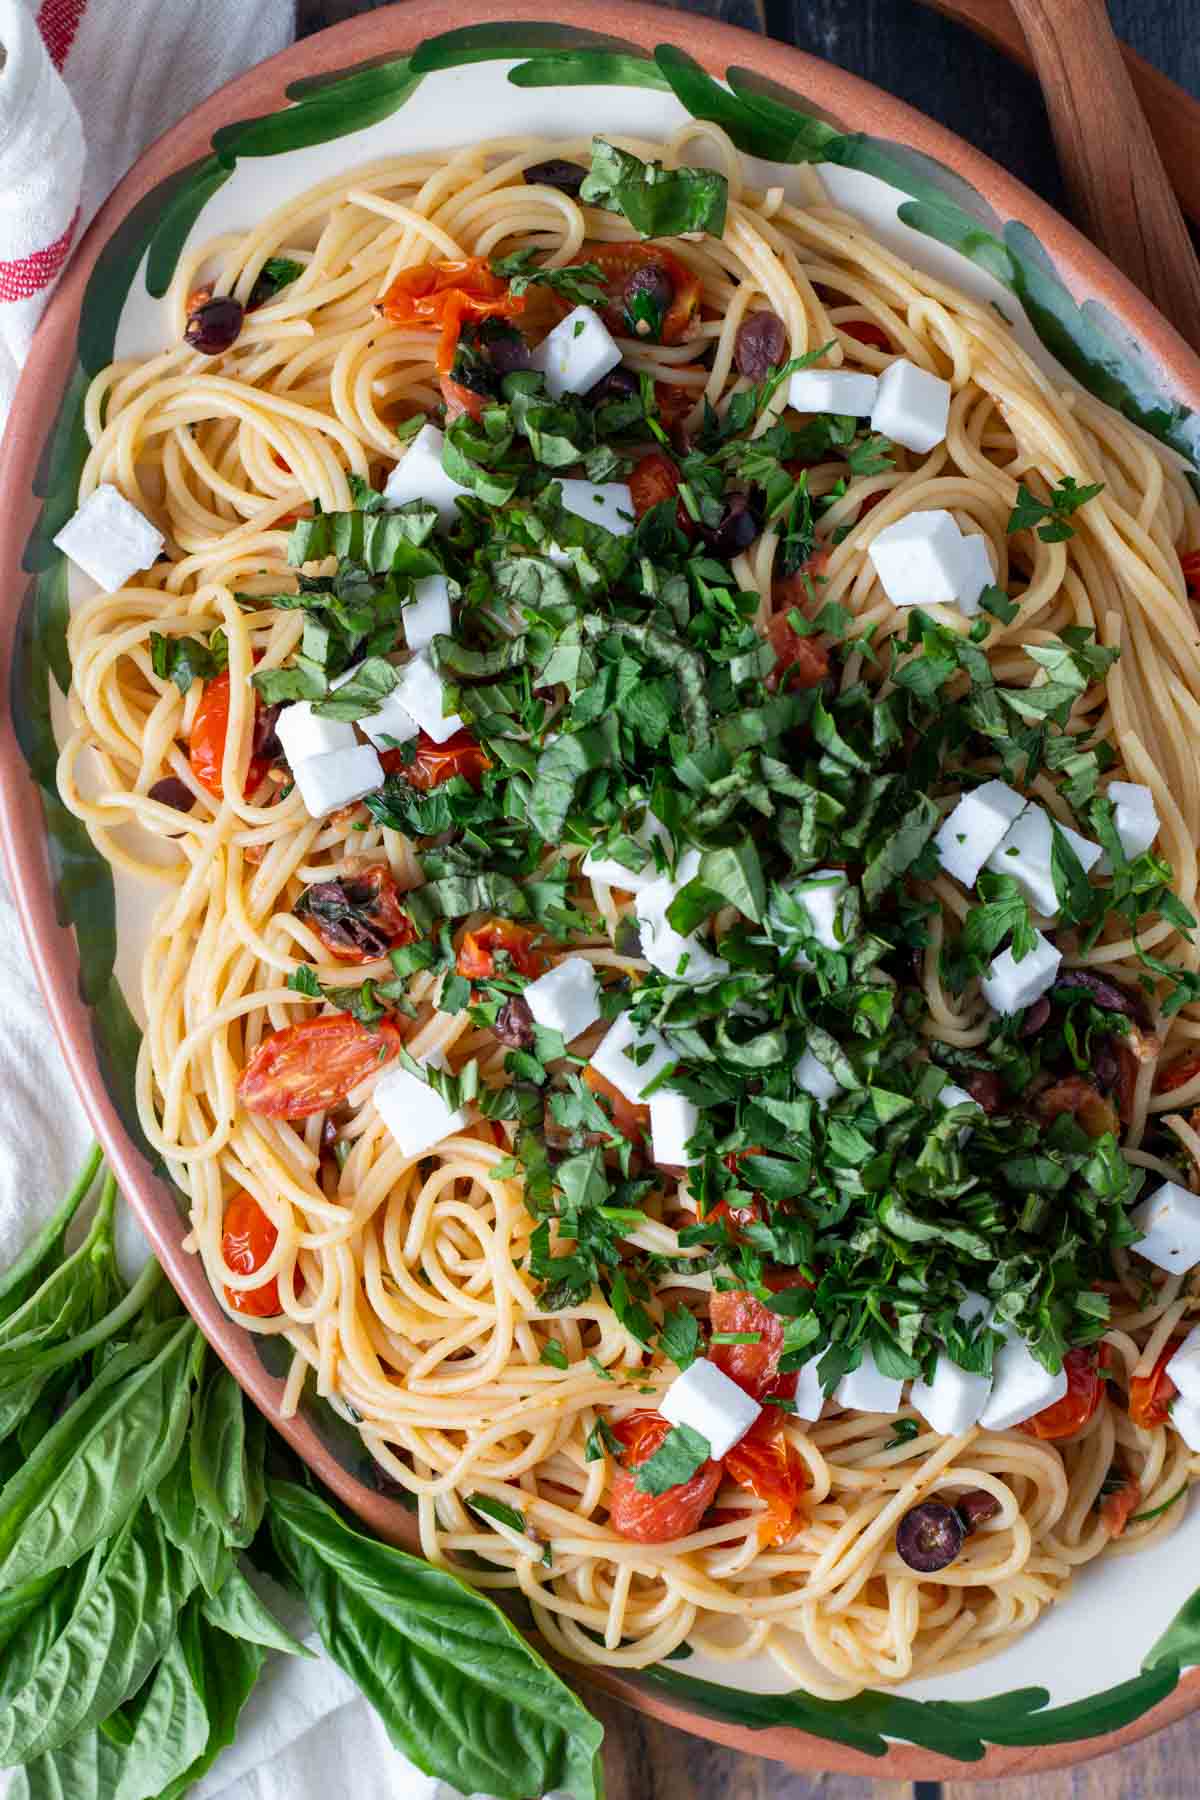 Greek spaghetti topped with fresh herbs and feta cheese cubes.
